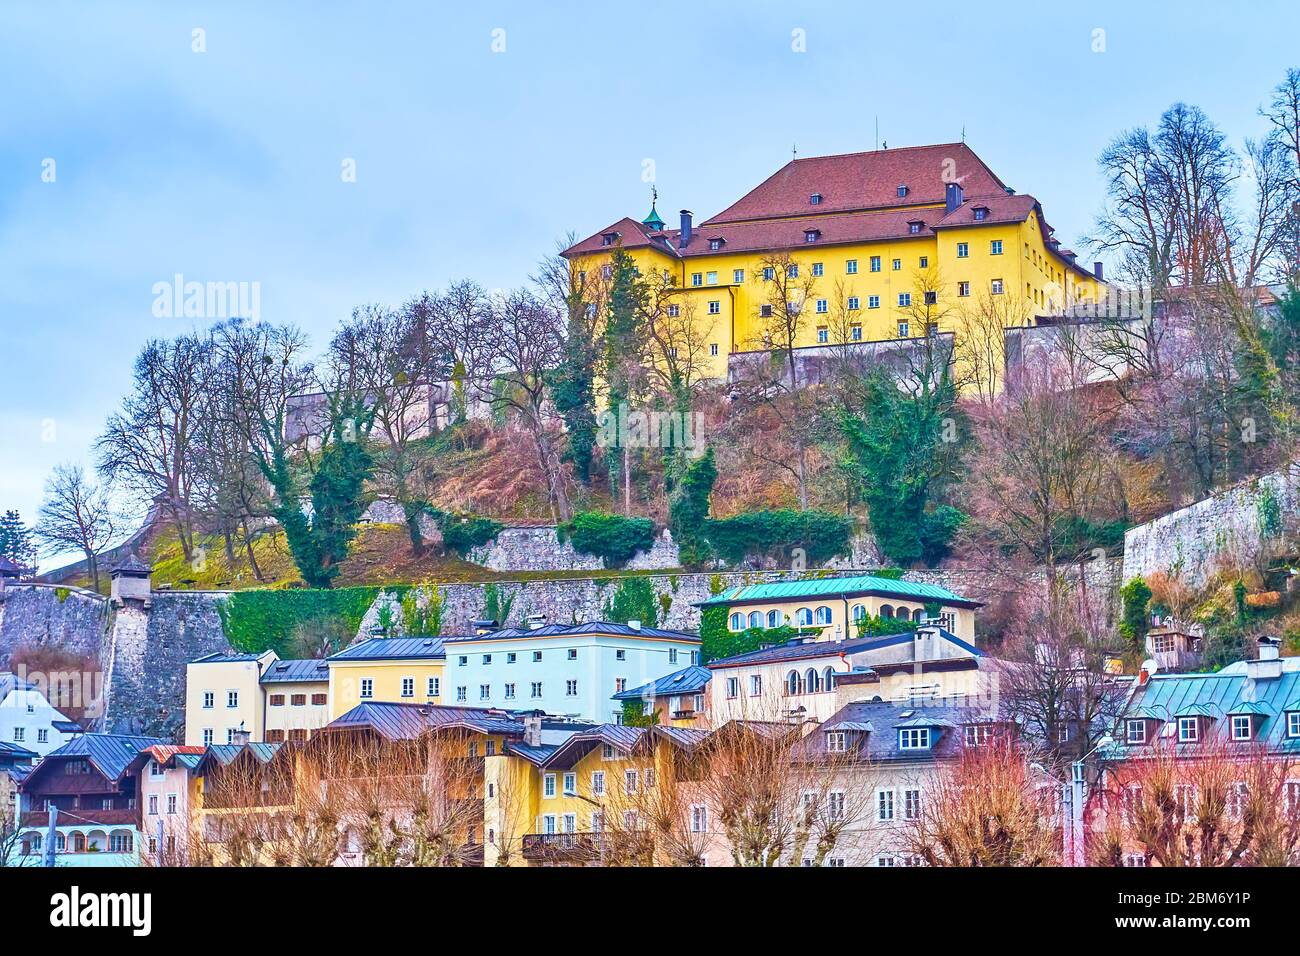 The monumental Kapuzinerkloster (Capuchin monastery) with medieval walls on the peak of Kapuzinerberg hill dominating over surrounding houses, Salzbur Stock Photo